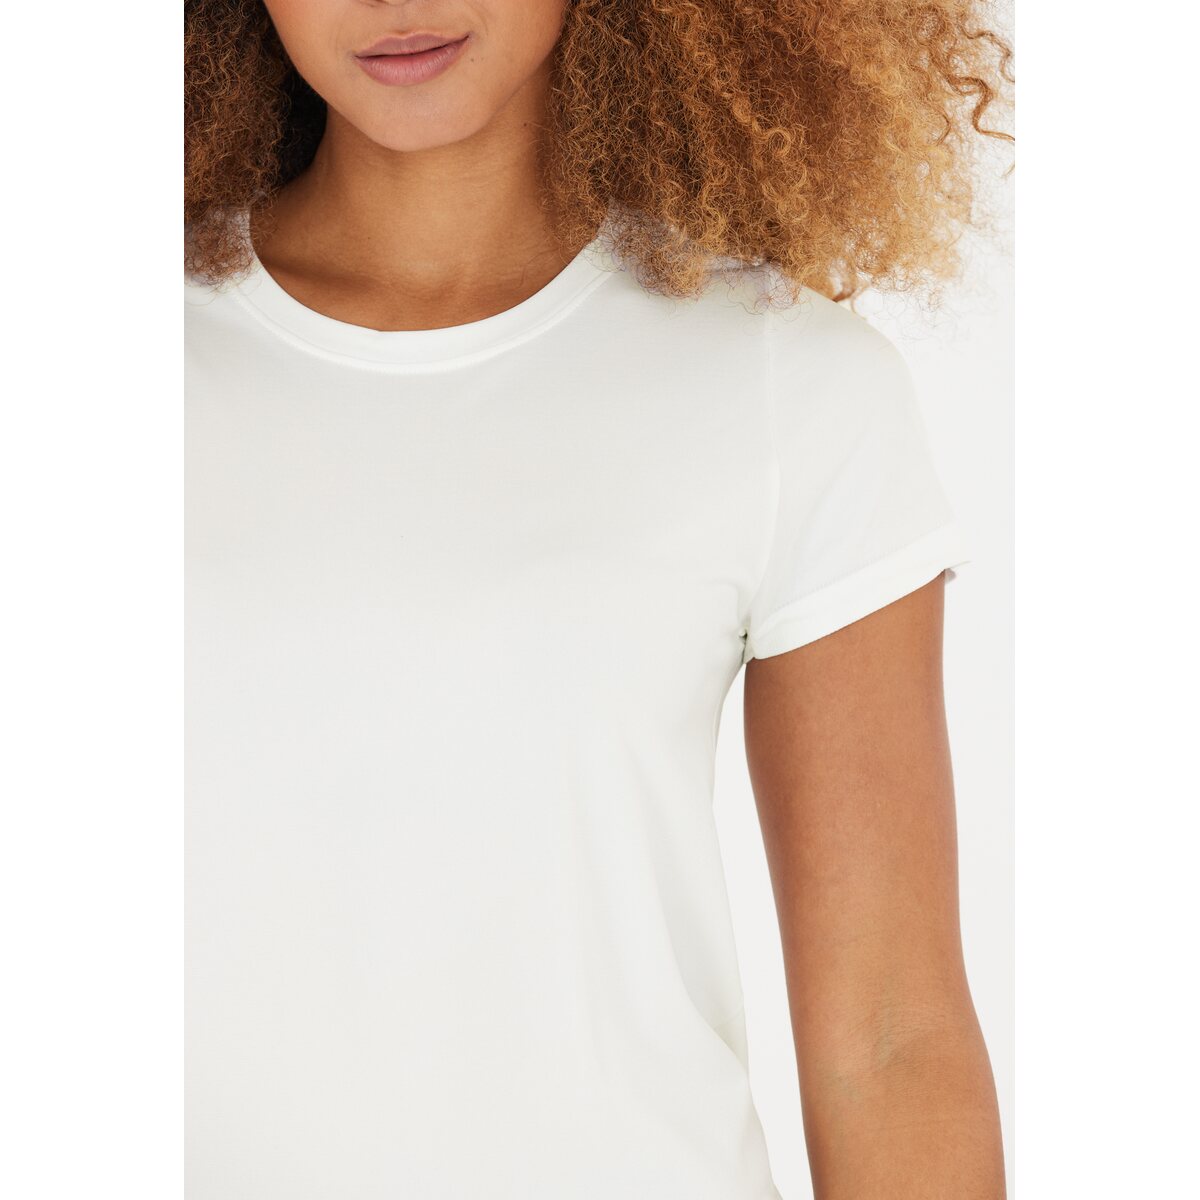 Athlecia Julee Womenswear Loose Fit Seamless Tee - White 5 Shaws Department Stores